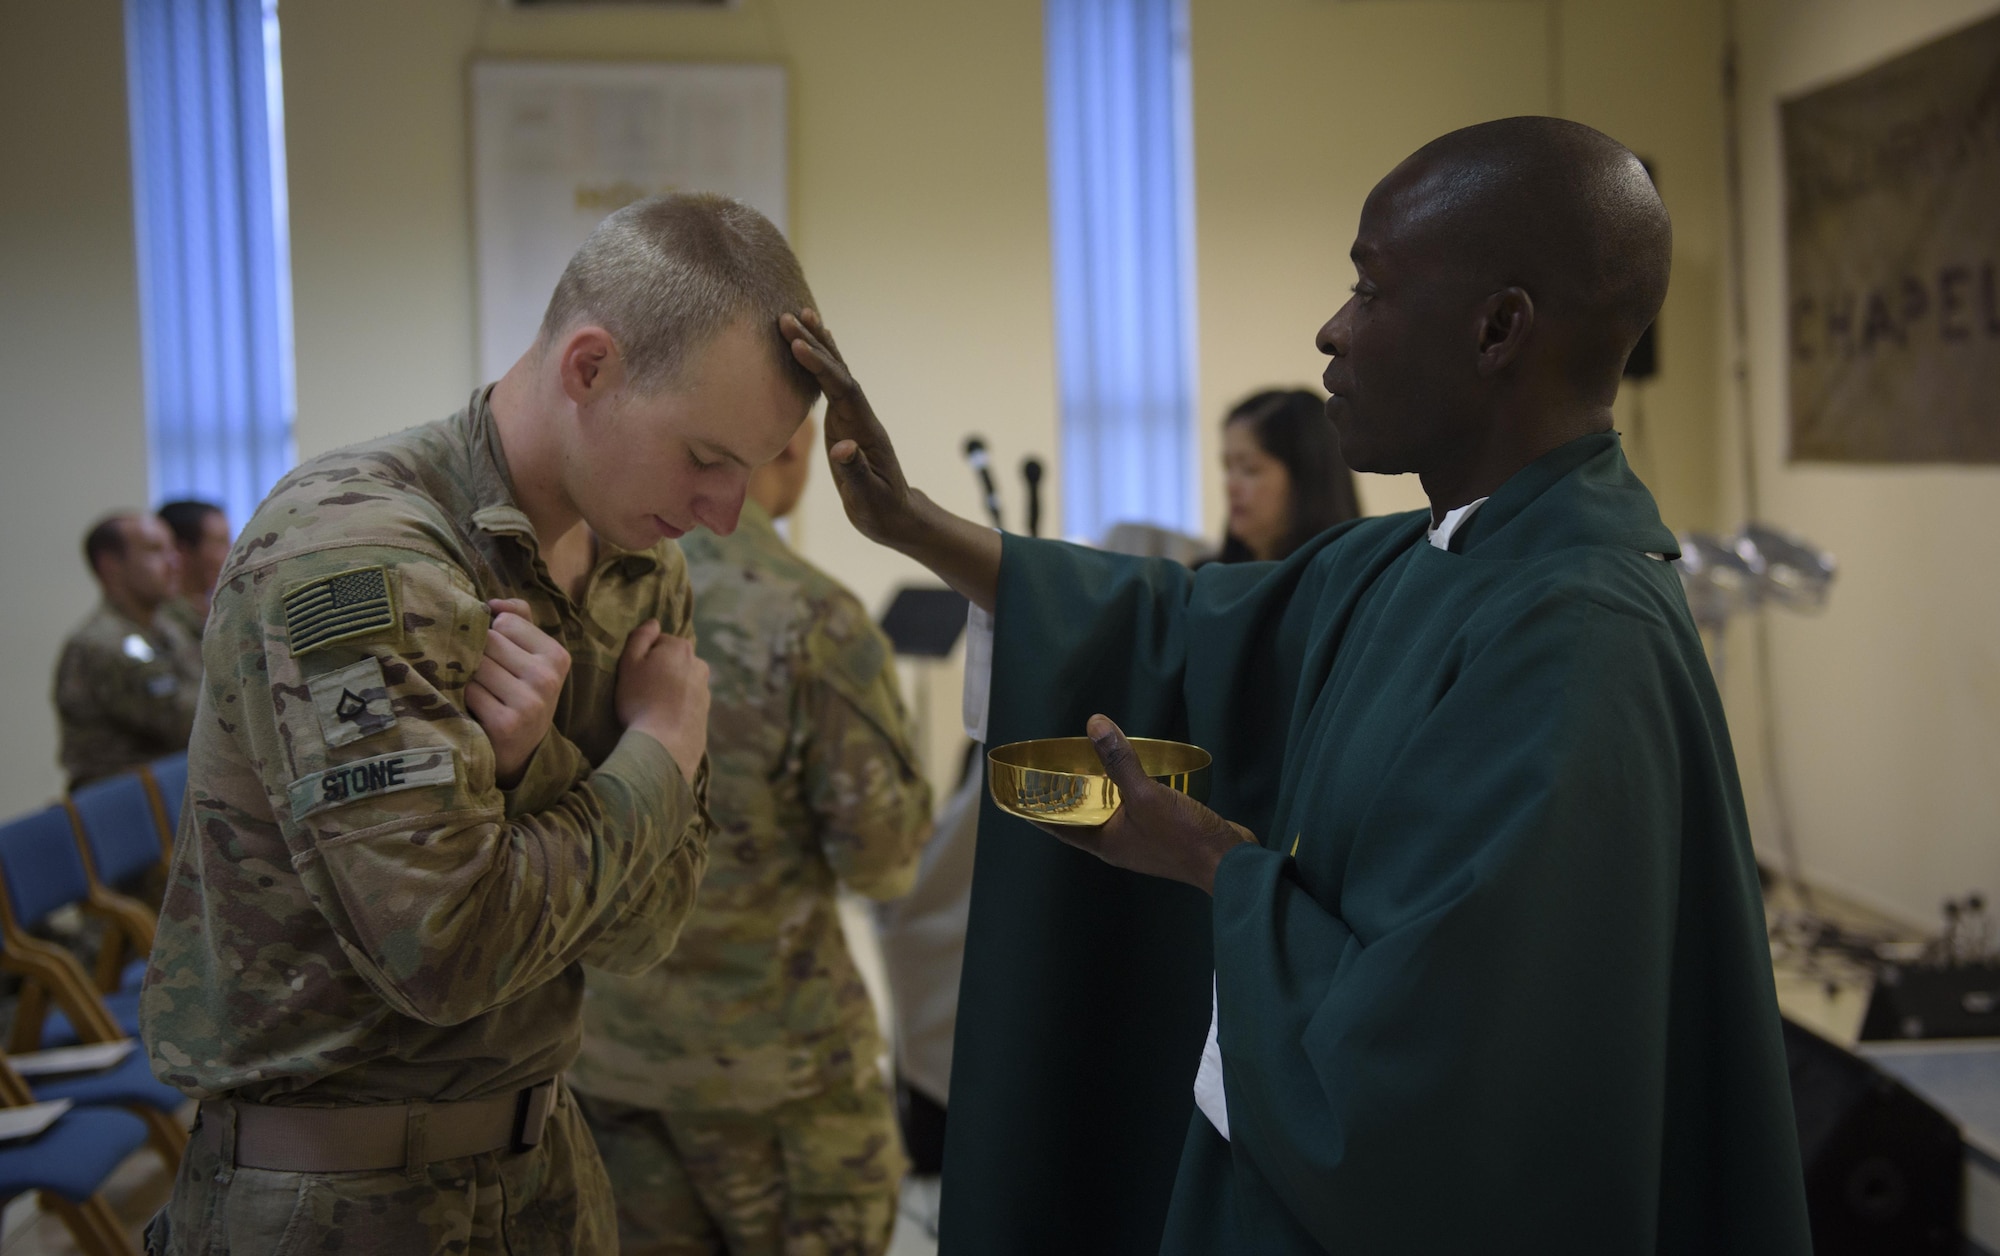 Chaplain (Capt.) John Appiah, 455th Air Expeditionary Wing, blesses a U.S. Army Soldier during a religious service at Hamid Karzai International Airport, Kabul, Afghanistan, July 23, 2017. Religious support teams from Bagram Airfield visit six different locations in Afghanistan where a chaplain is not deployed. (U.S. Air Force photo by Staff Sgt. Benjamin Gonsier) 